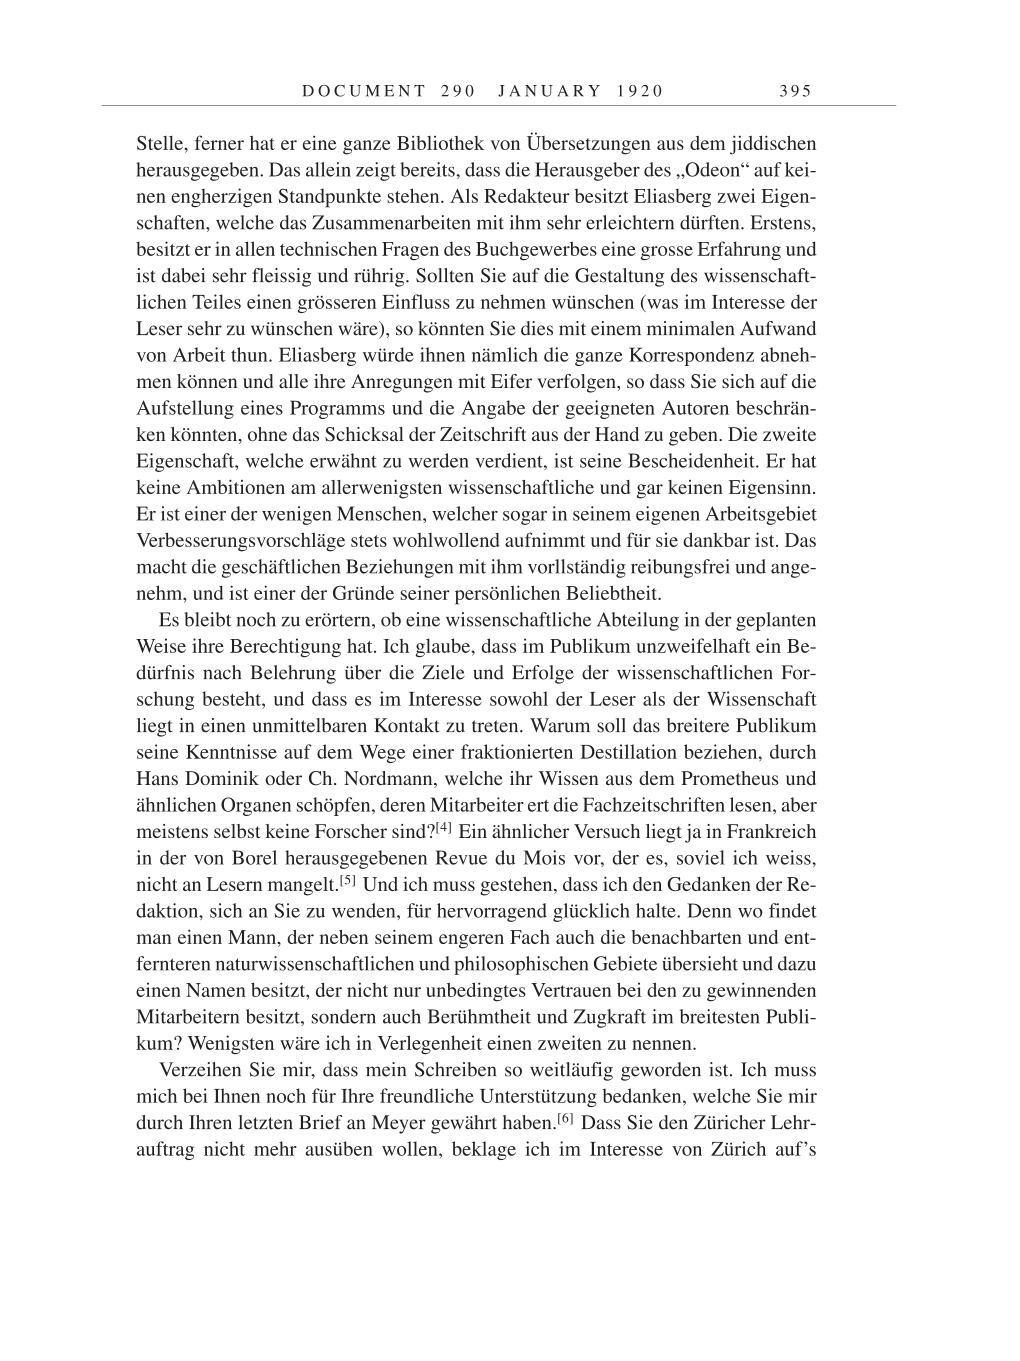 Volume 9: The Berlin Years: Correspondence January 1919-April 1920 page 395